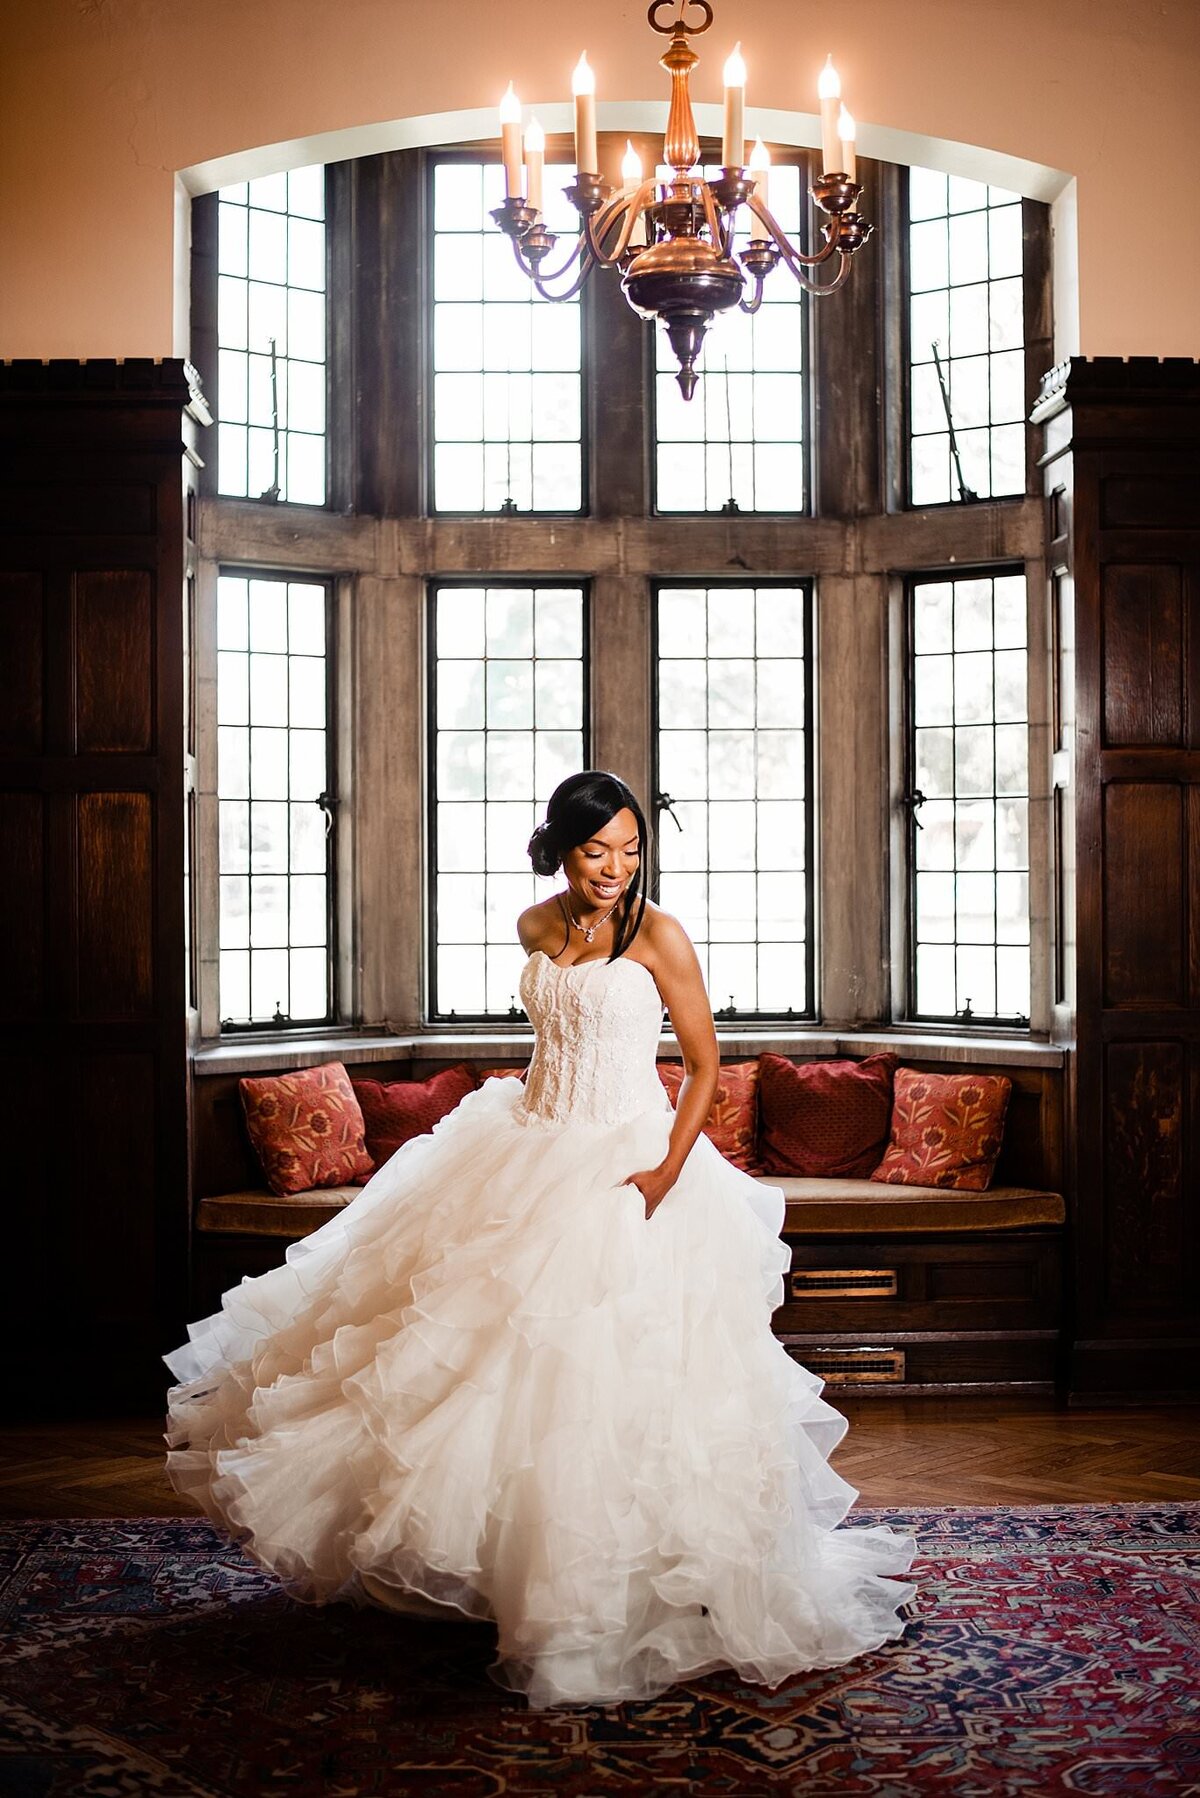 The bride, wearing a strapless dress with a fitted bodice and very full ruffled skirt twirls excitedly in front of a massive bay window.